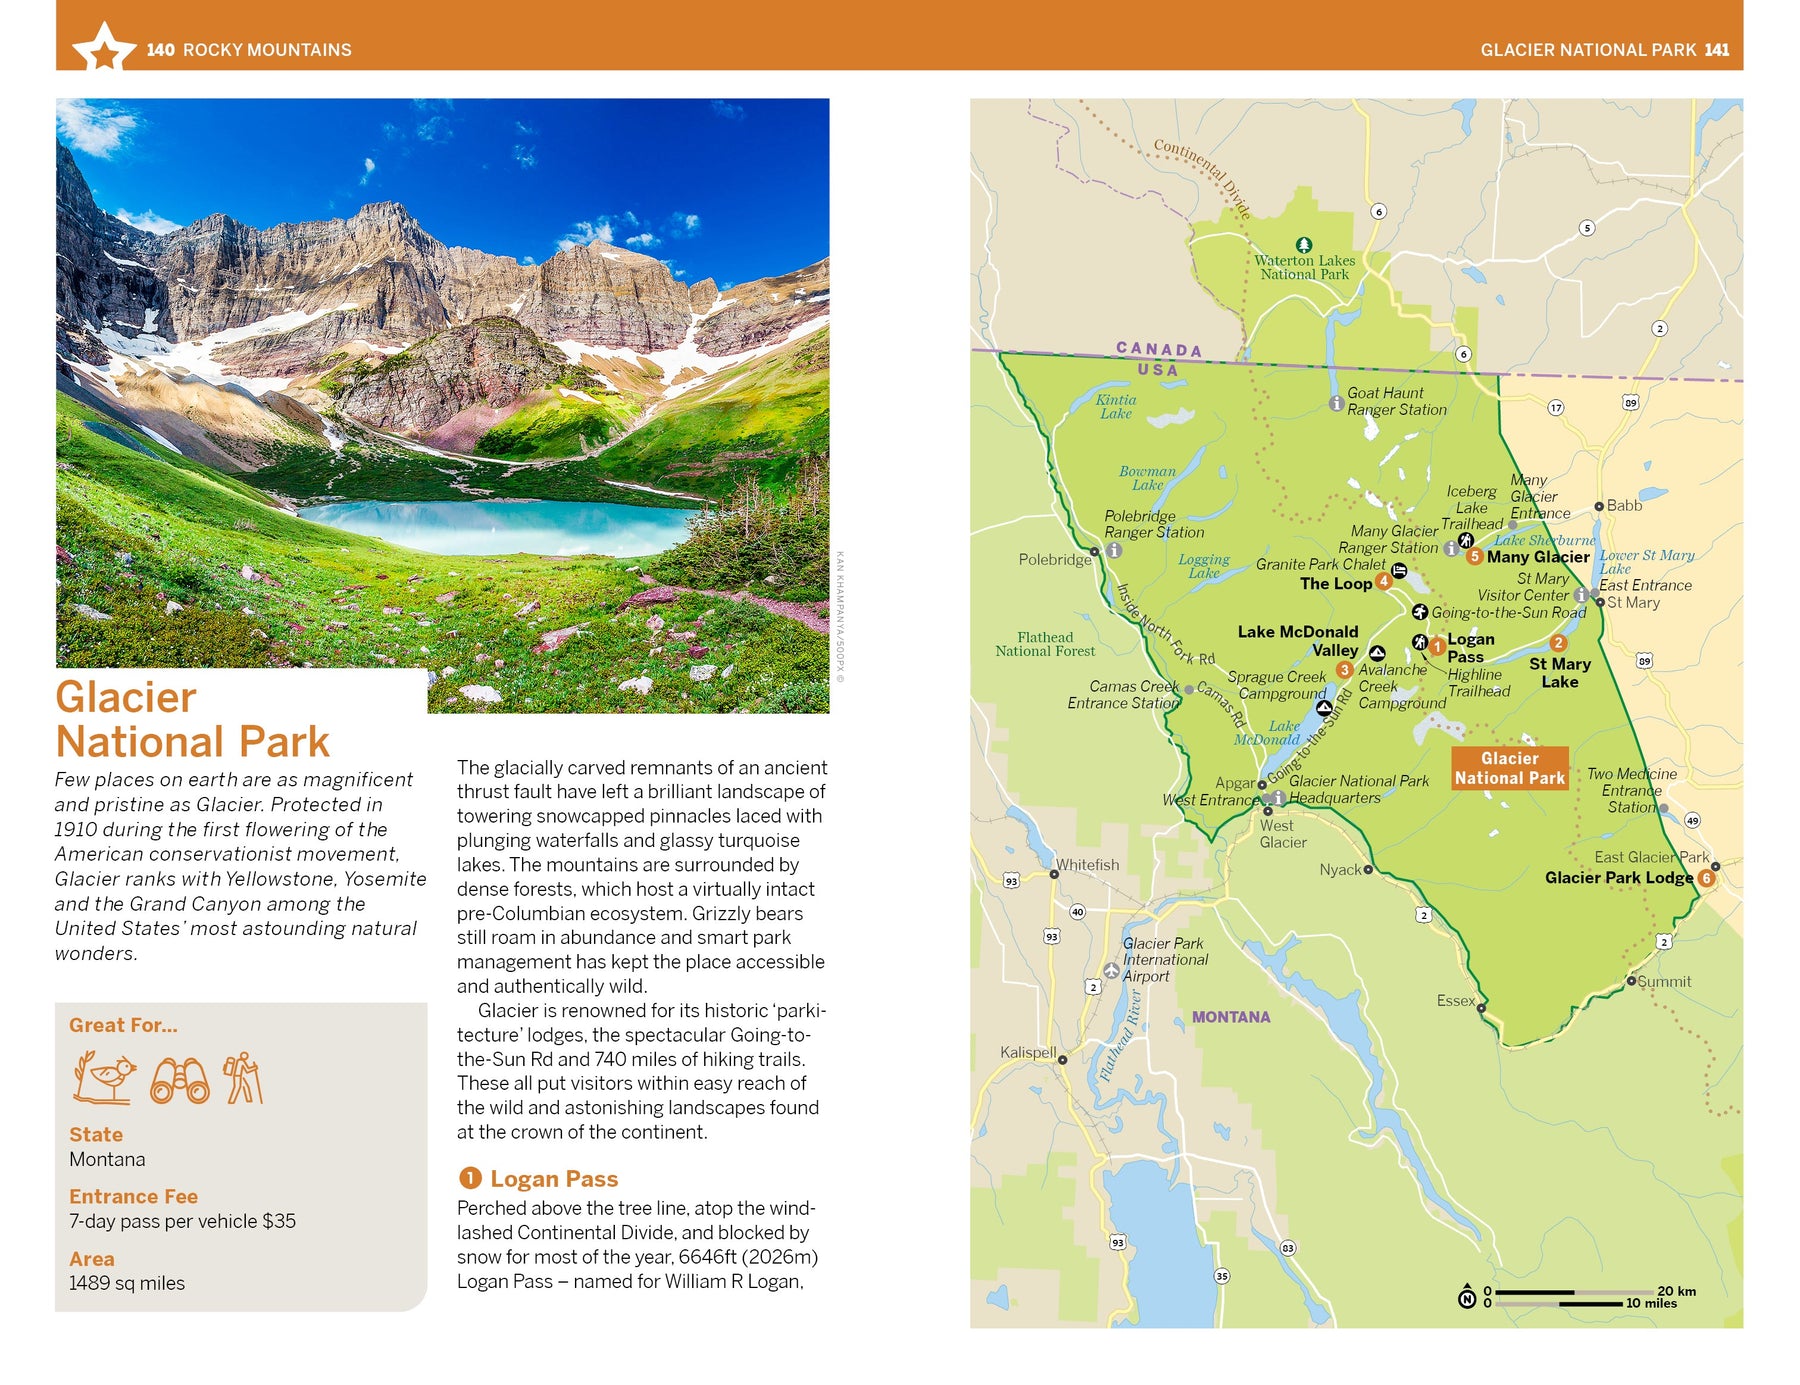 Rocky Mountains & Pacific Northwest's National Parks - Book